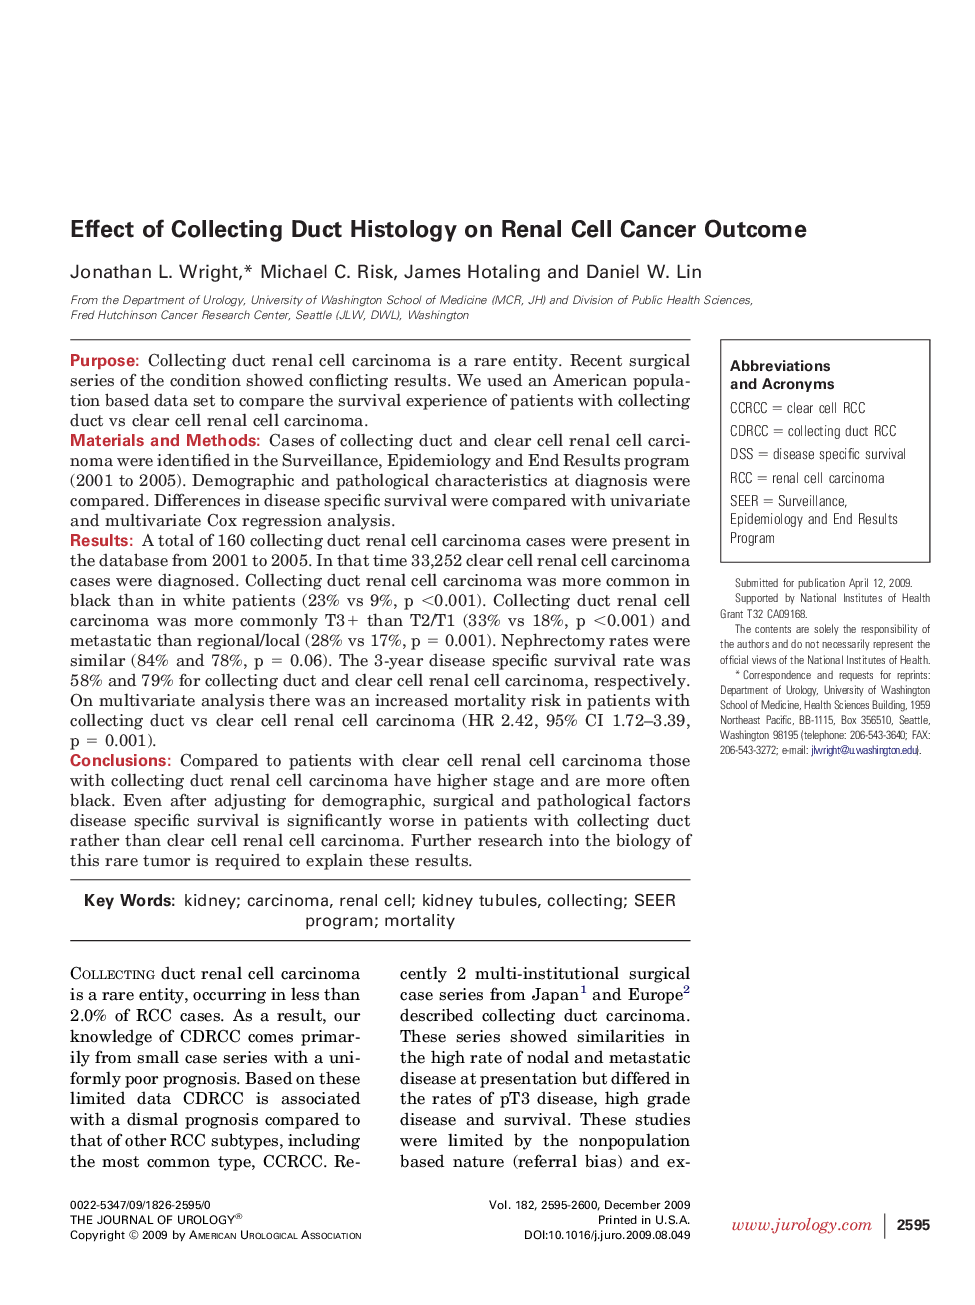 Effect of Collecting Duct Histology on Renal Cell Cancer Outcome 